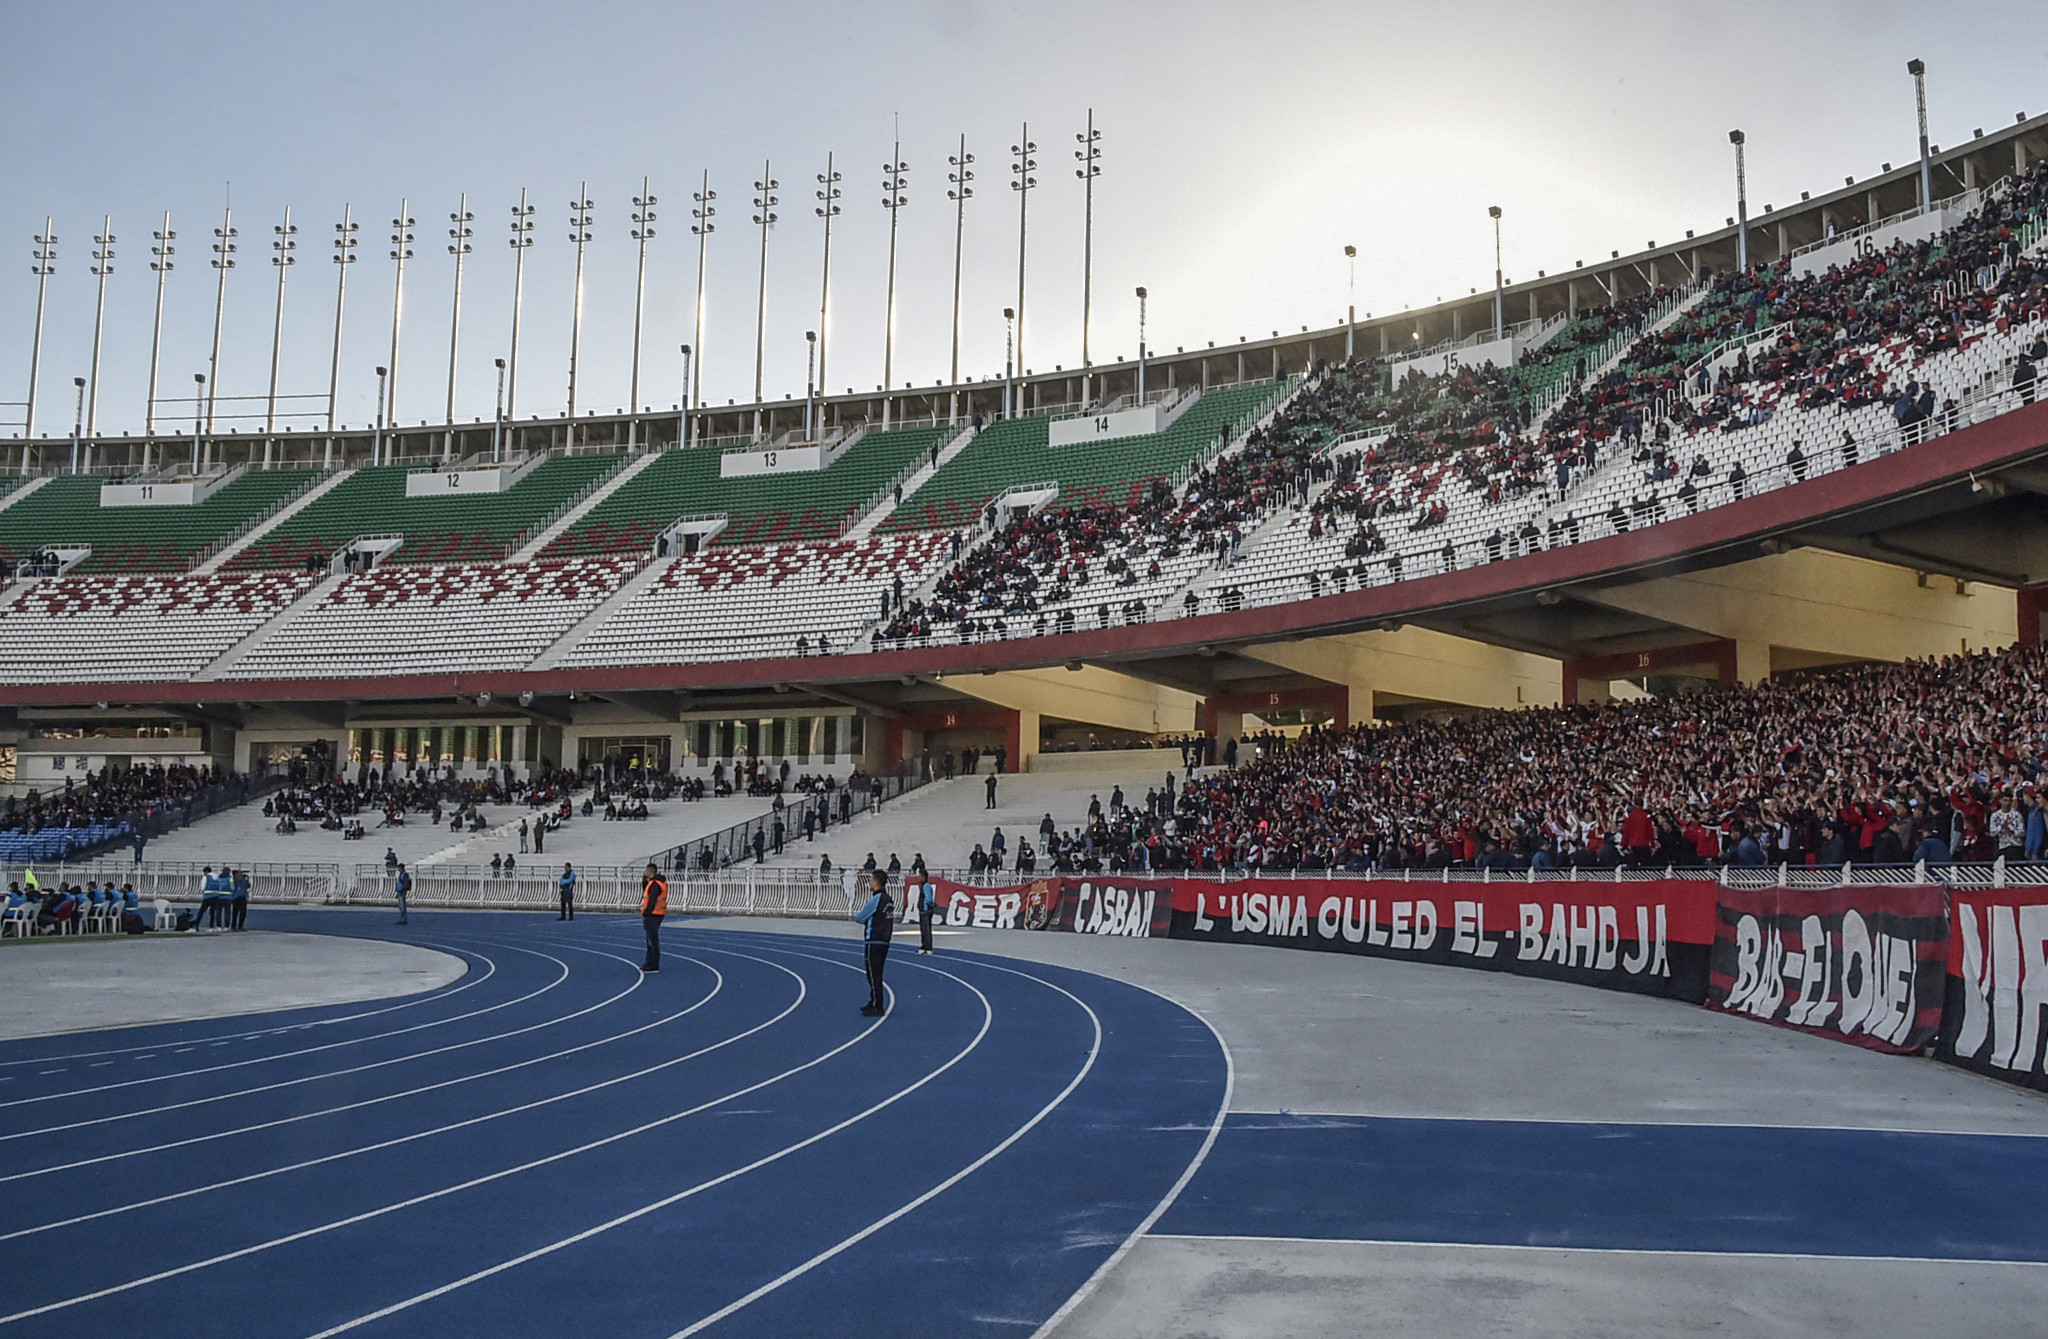 Algeria's hosting of first Pan Arab Games in over a decade to coincide with Independence Day